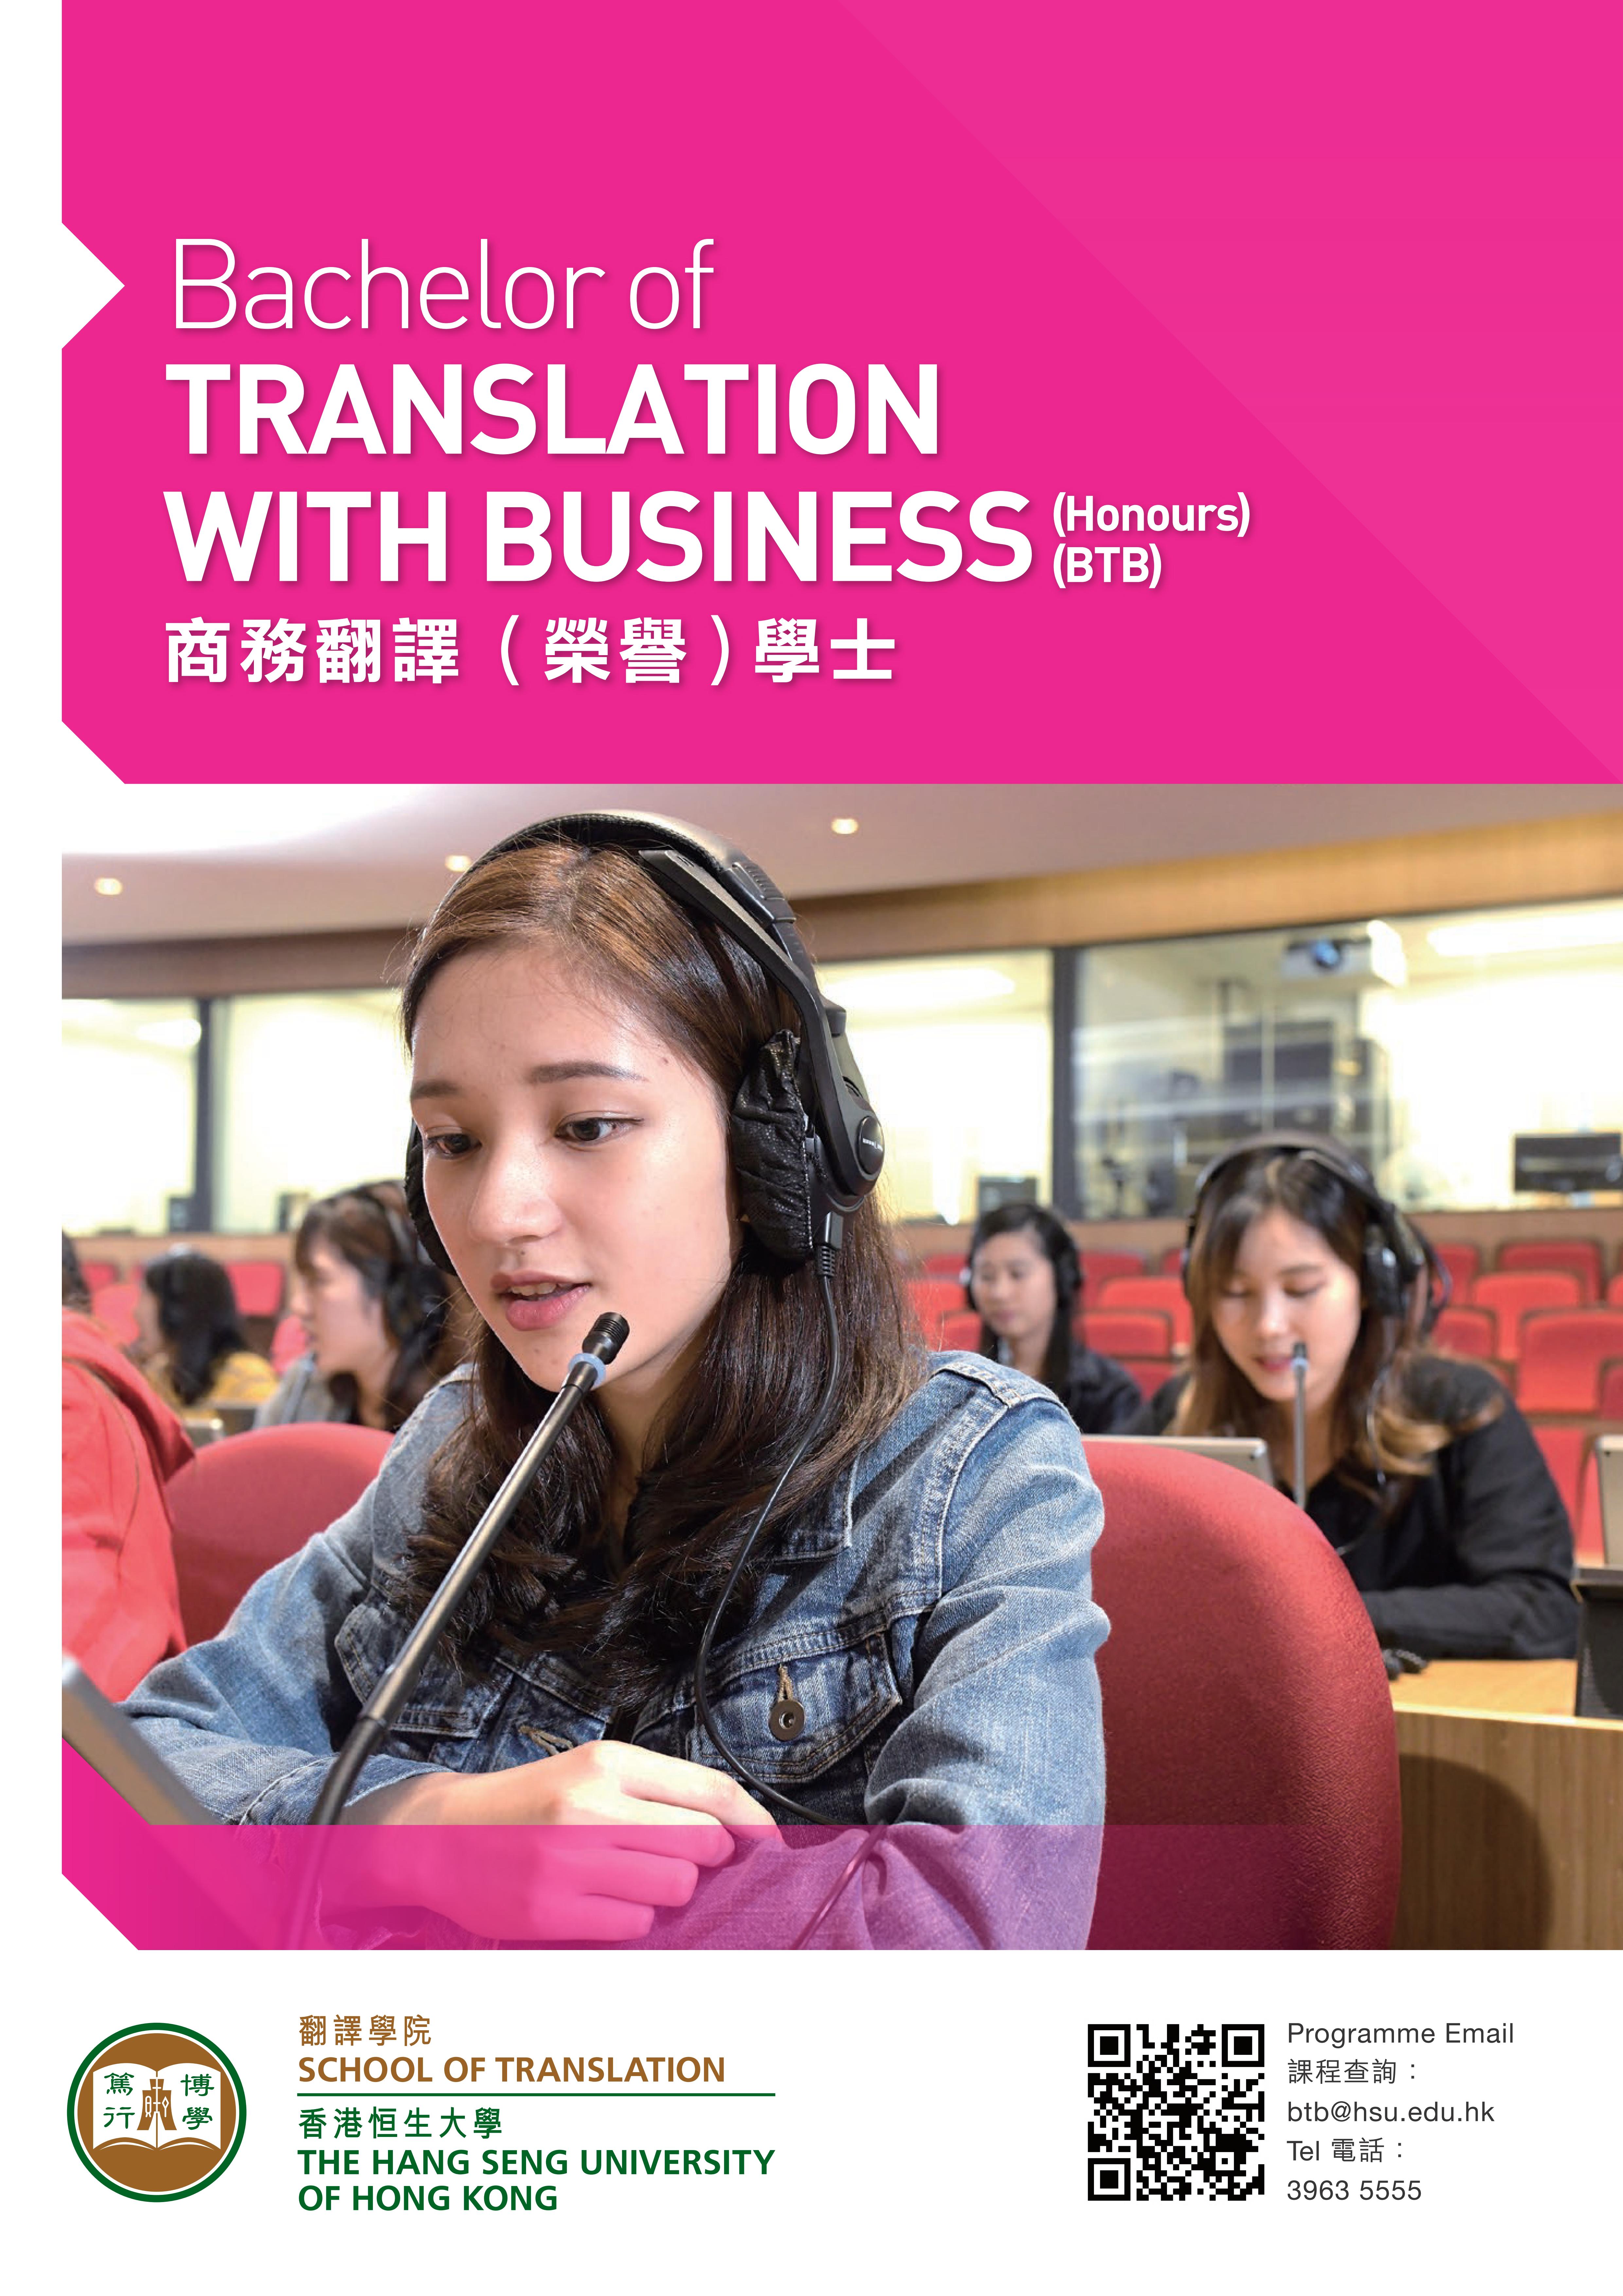 Bachelor of Translation with Business (Honours) BTB_2019